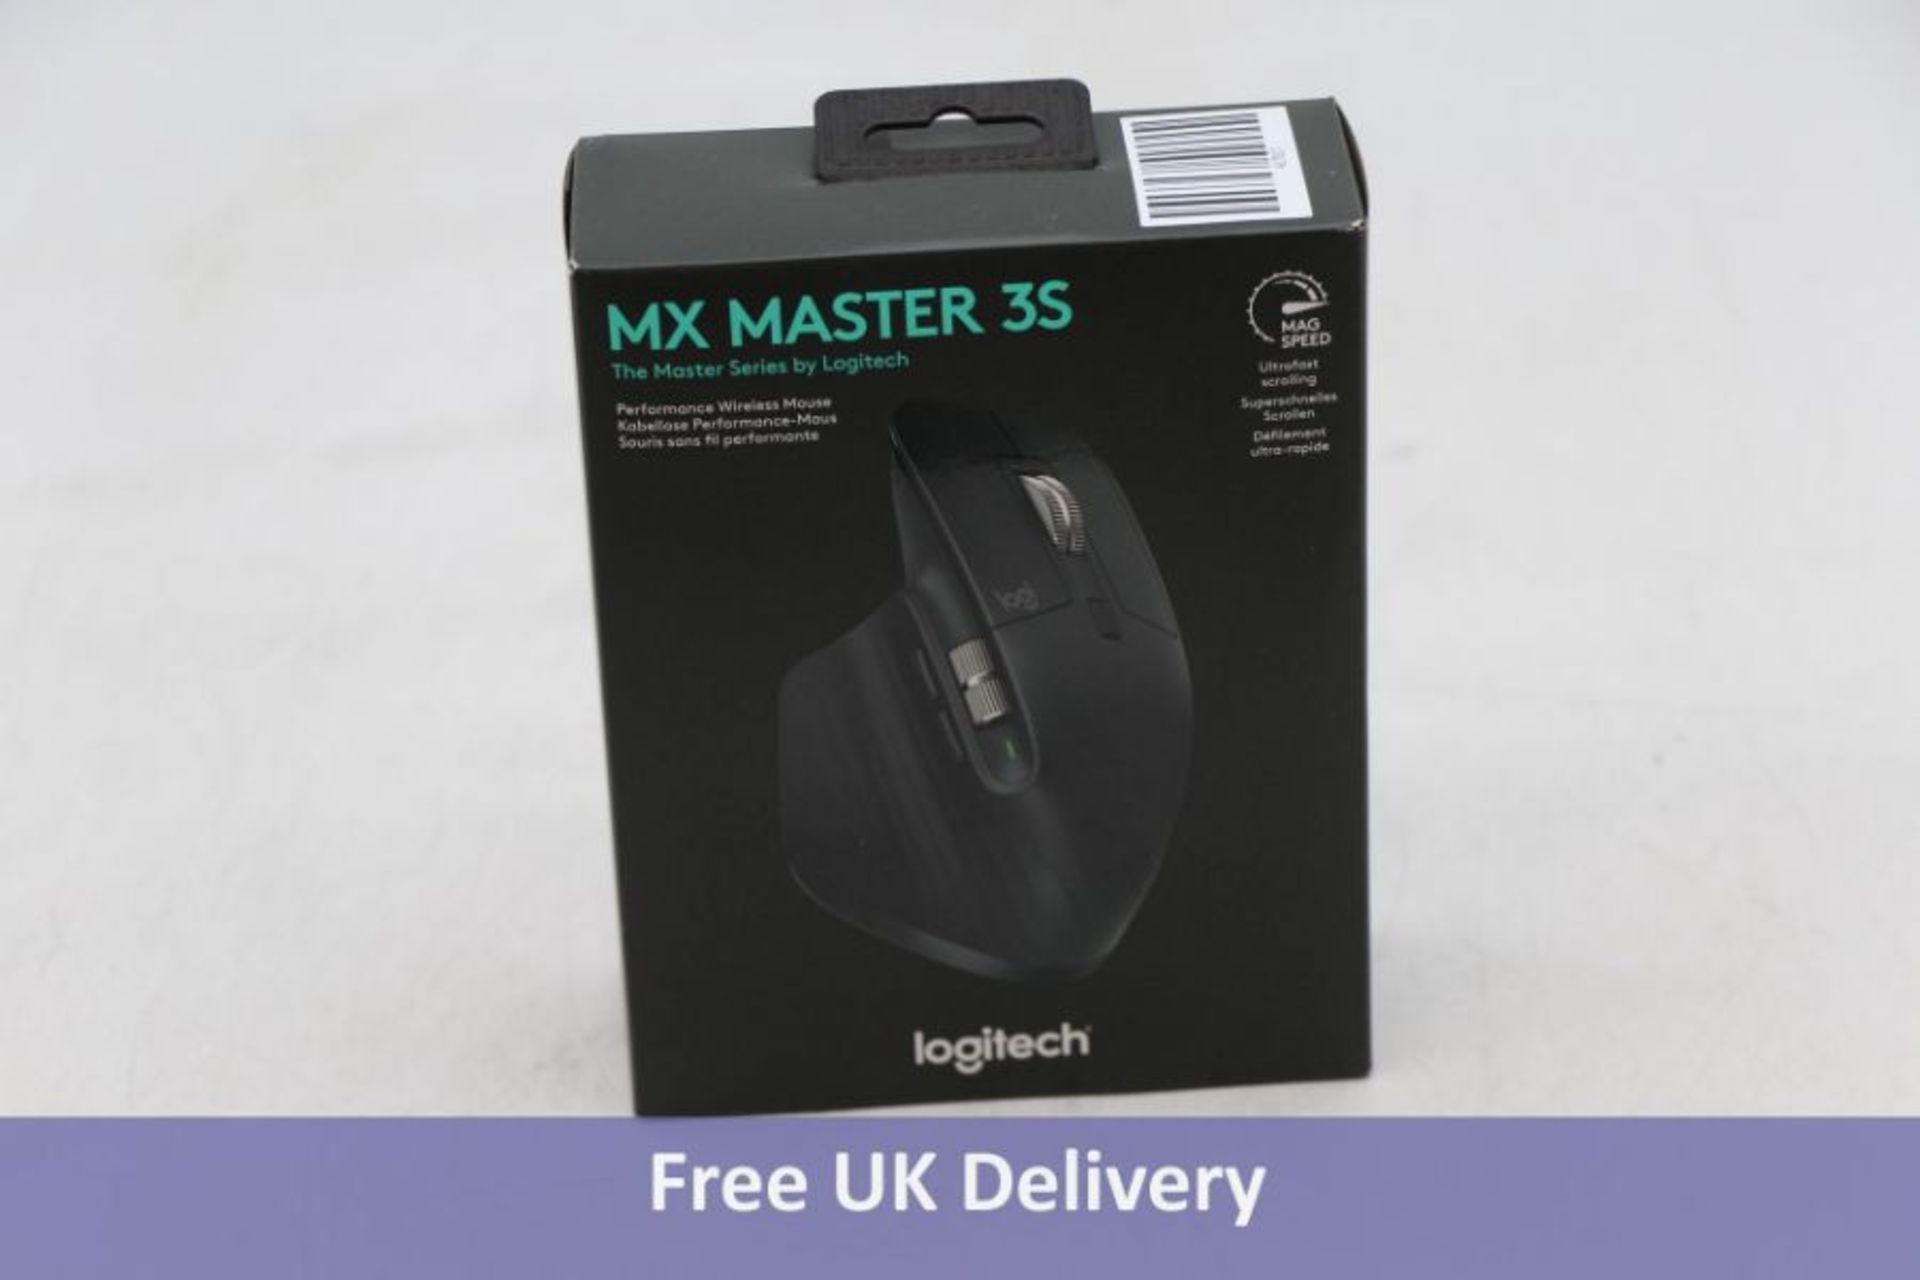 Logitech MX Master 3S Wireless Performance Mouse in Chrome Graphite